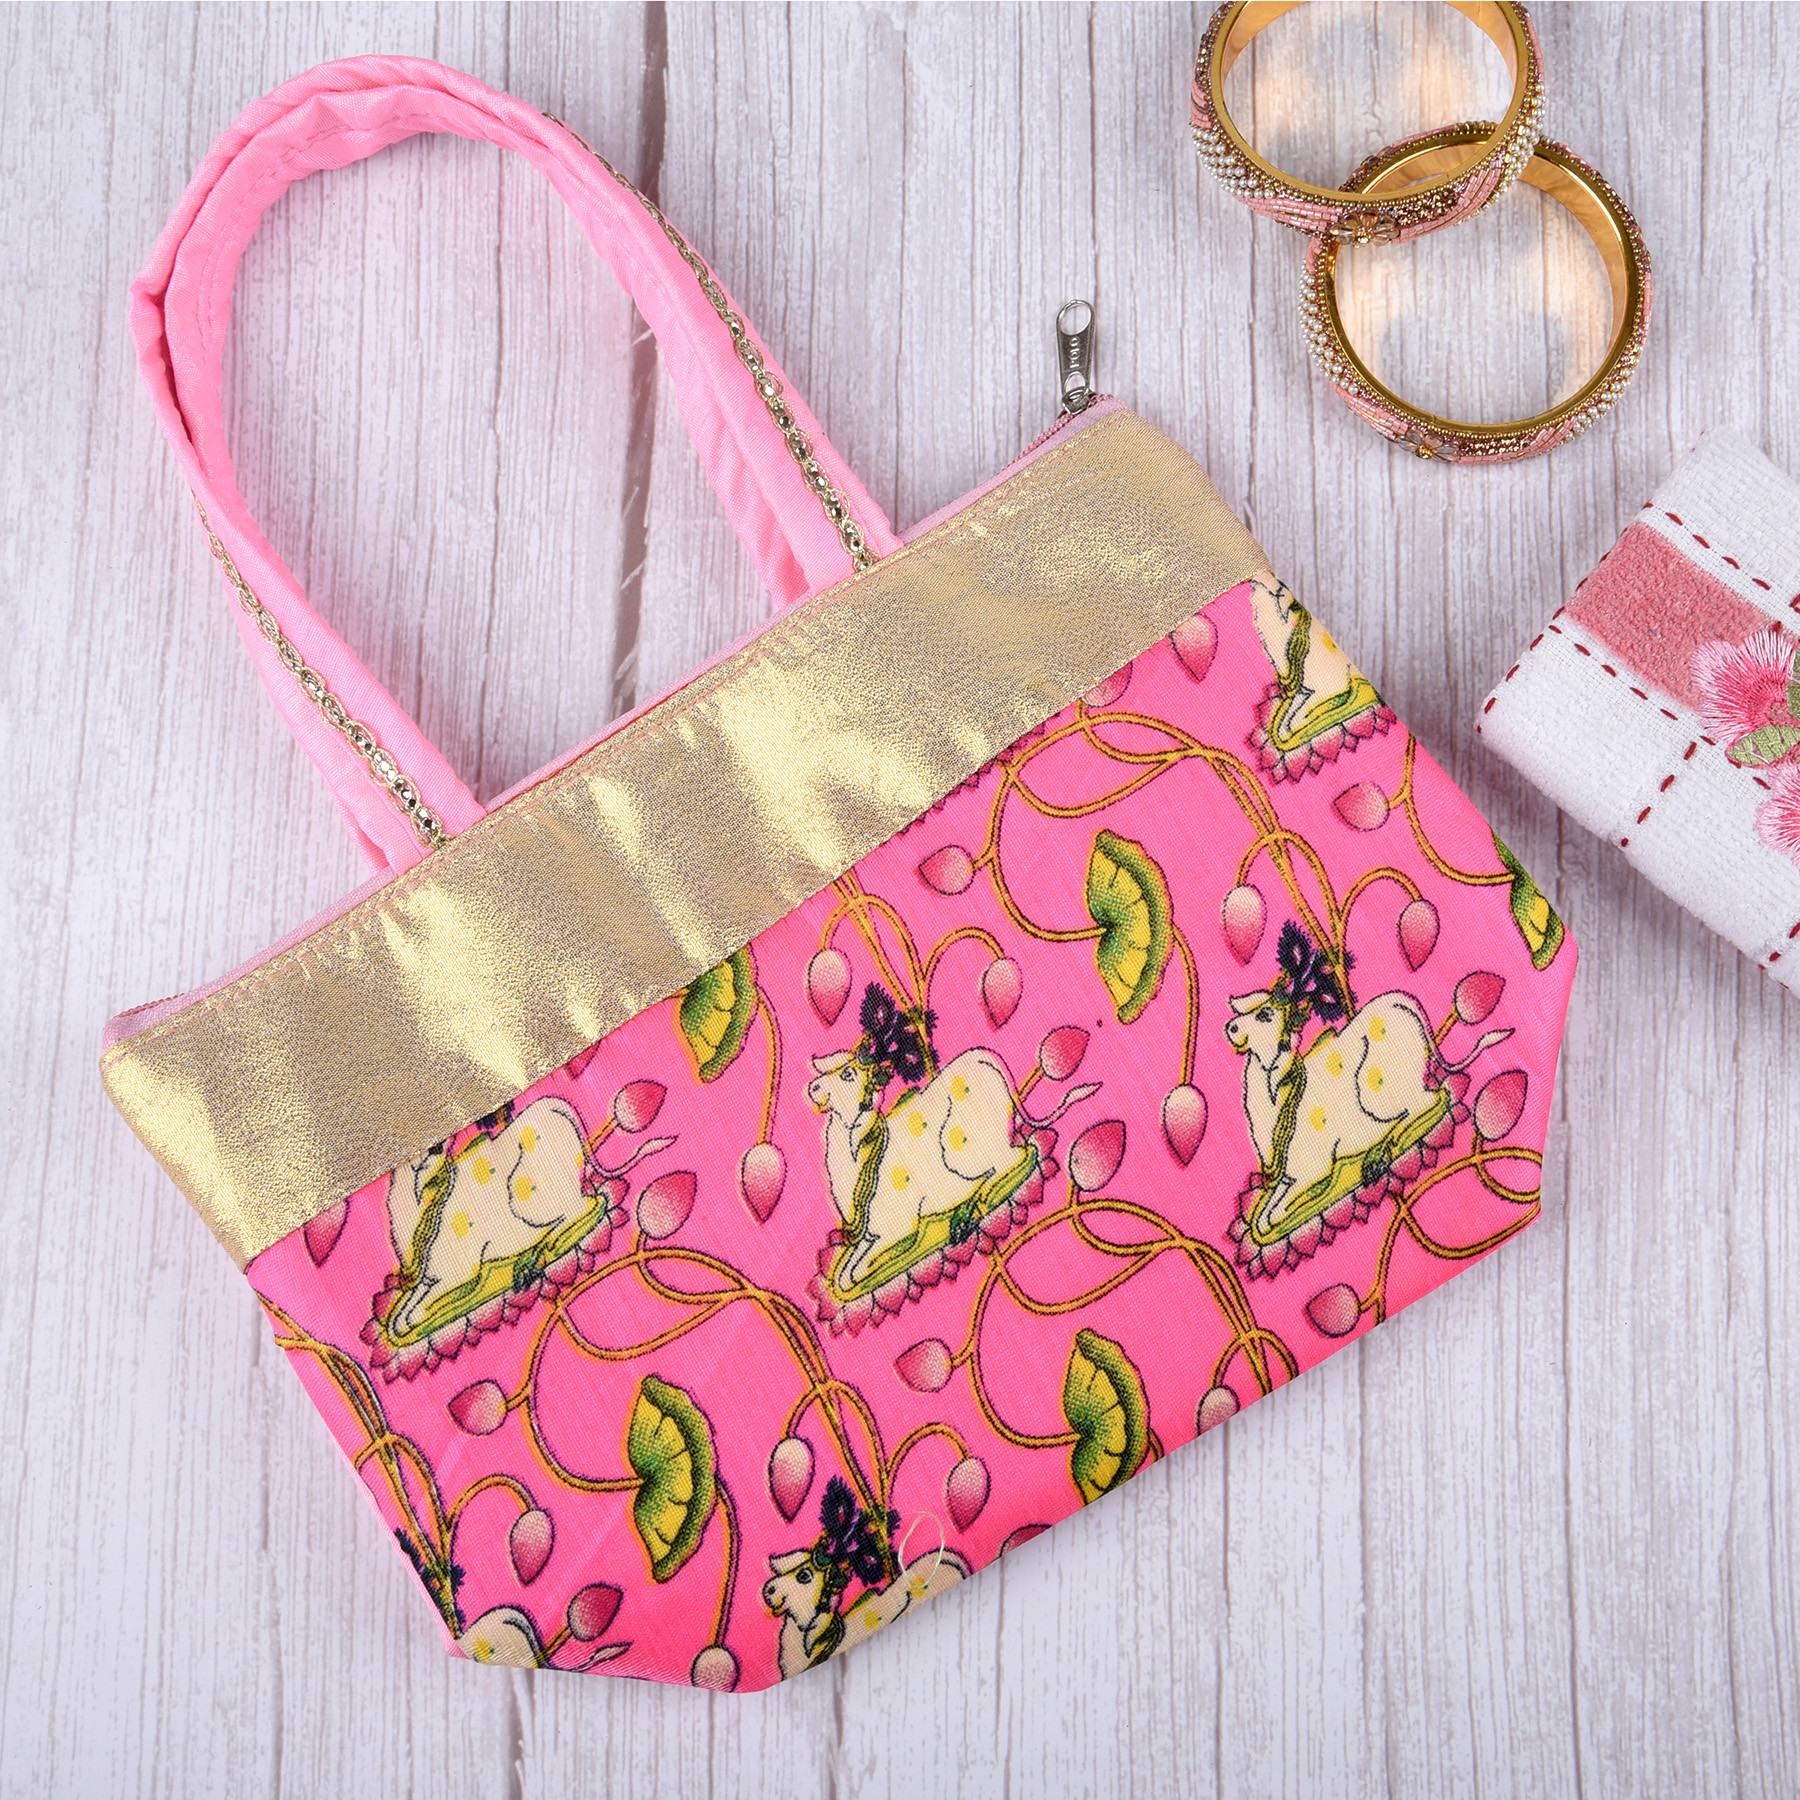 Kuber Industries Hand Purse | Traditional Mini Hand Bag | Silk Wallet Hand Bag | Shagun Hand Purse | Woman Tote Hand Bag | Gifts Hand Bag | Cow-Small Hand Purse | Pink